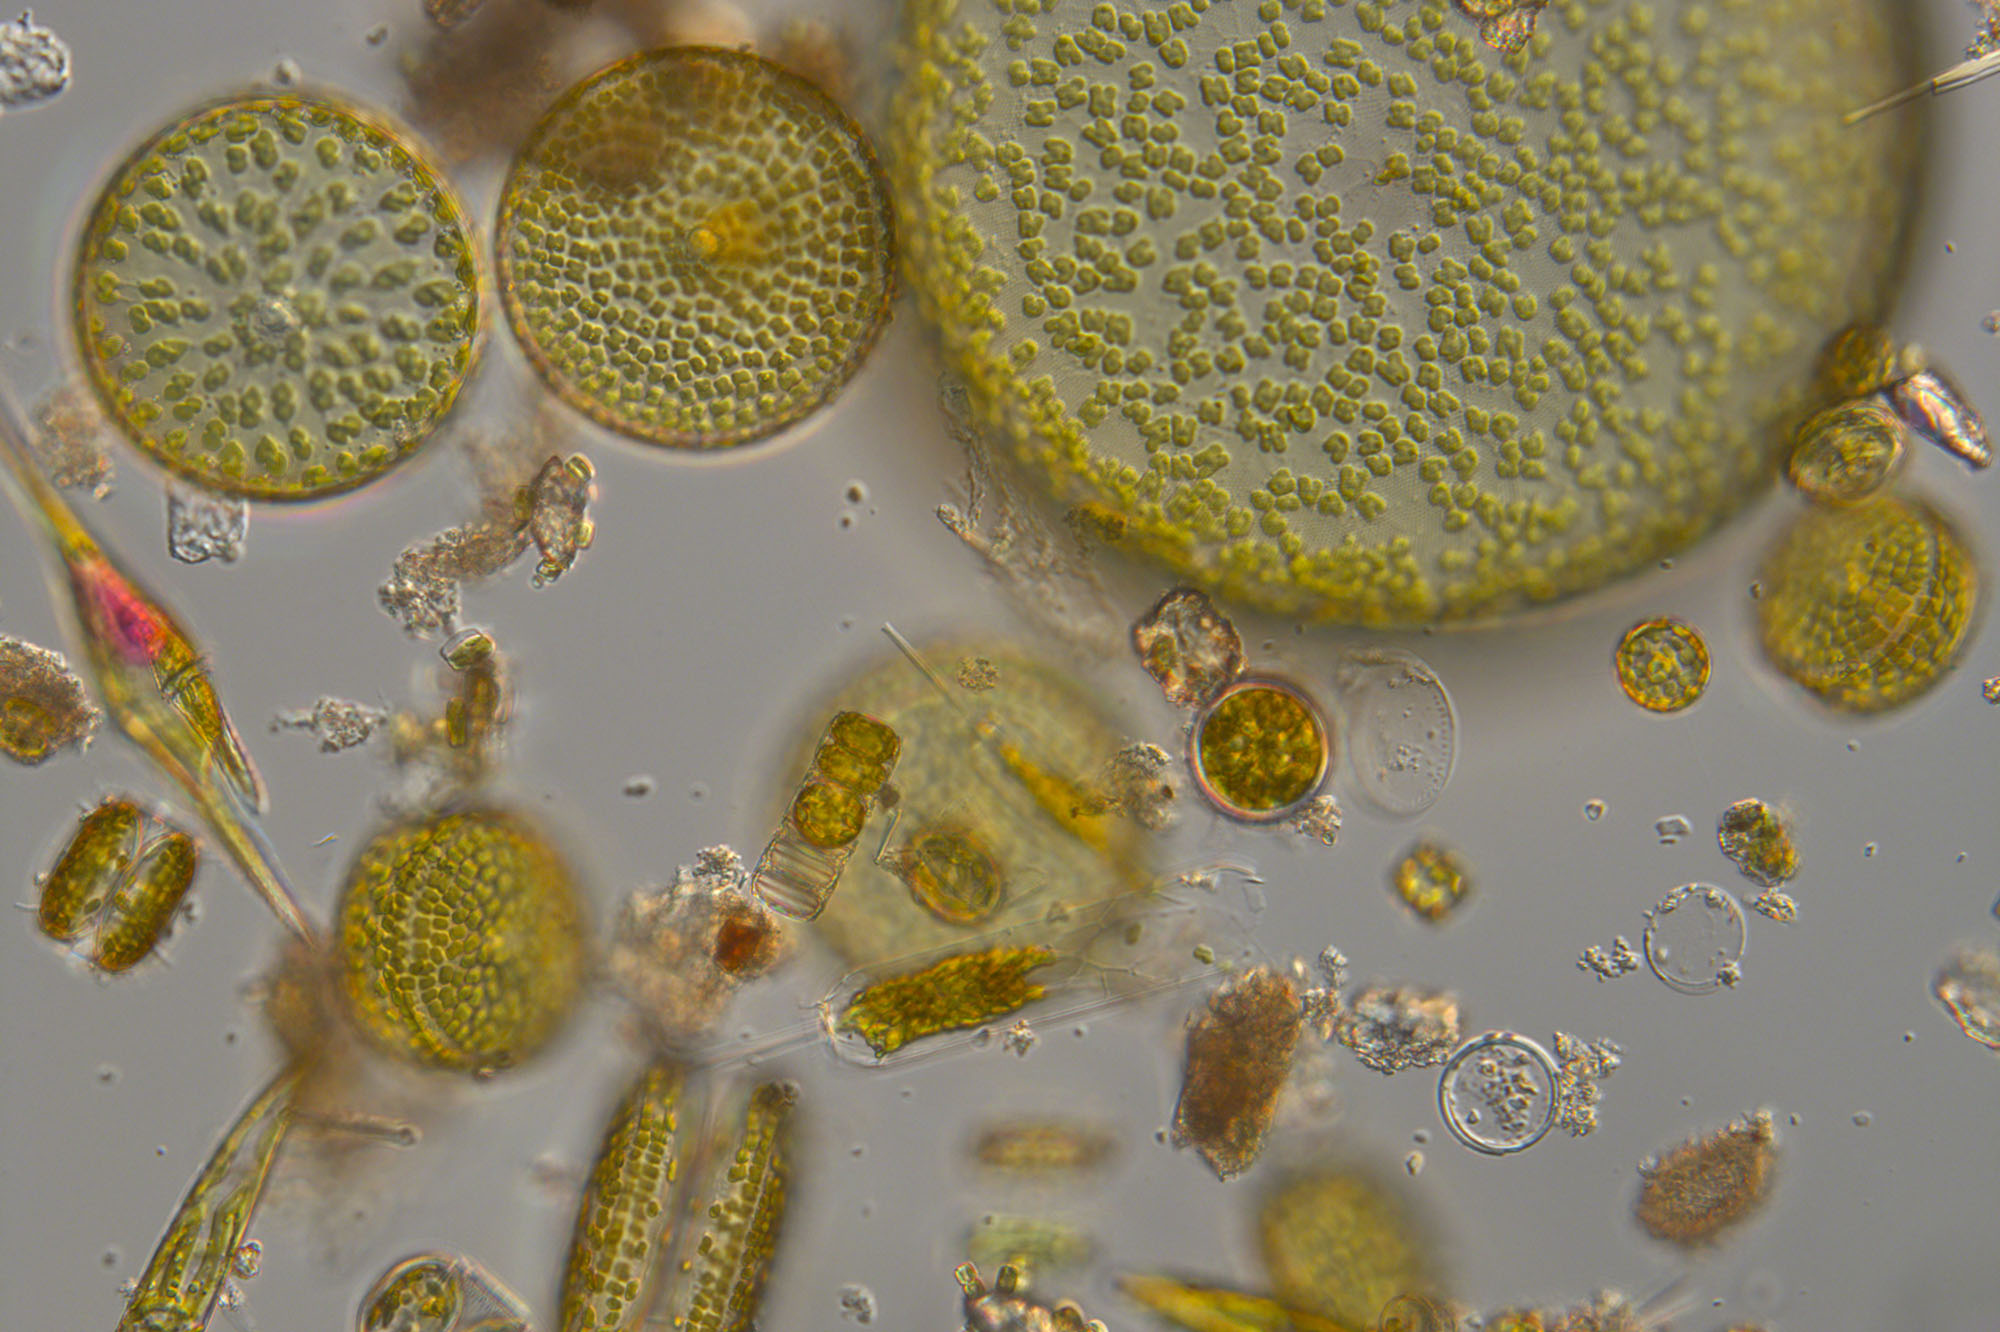 Phytoplankton by Claire Widdicombe